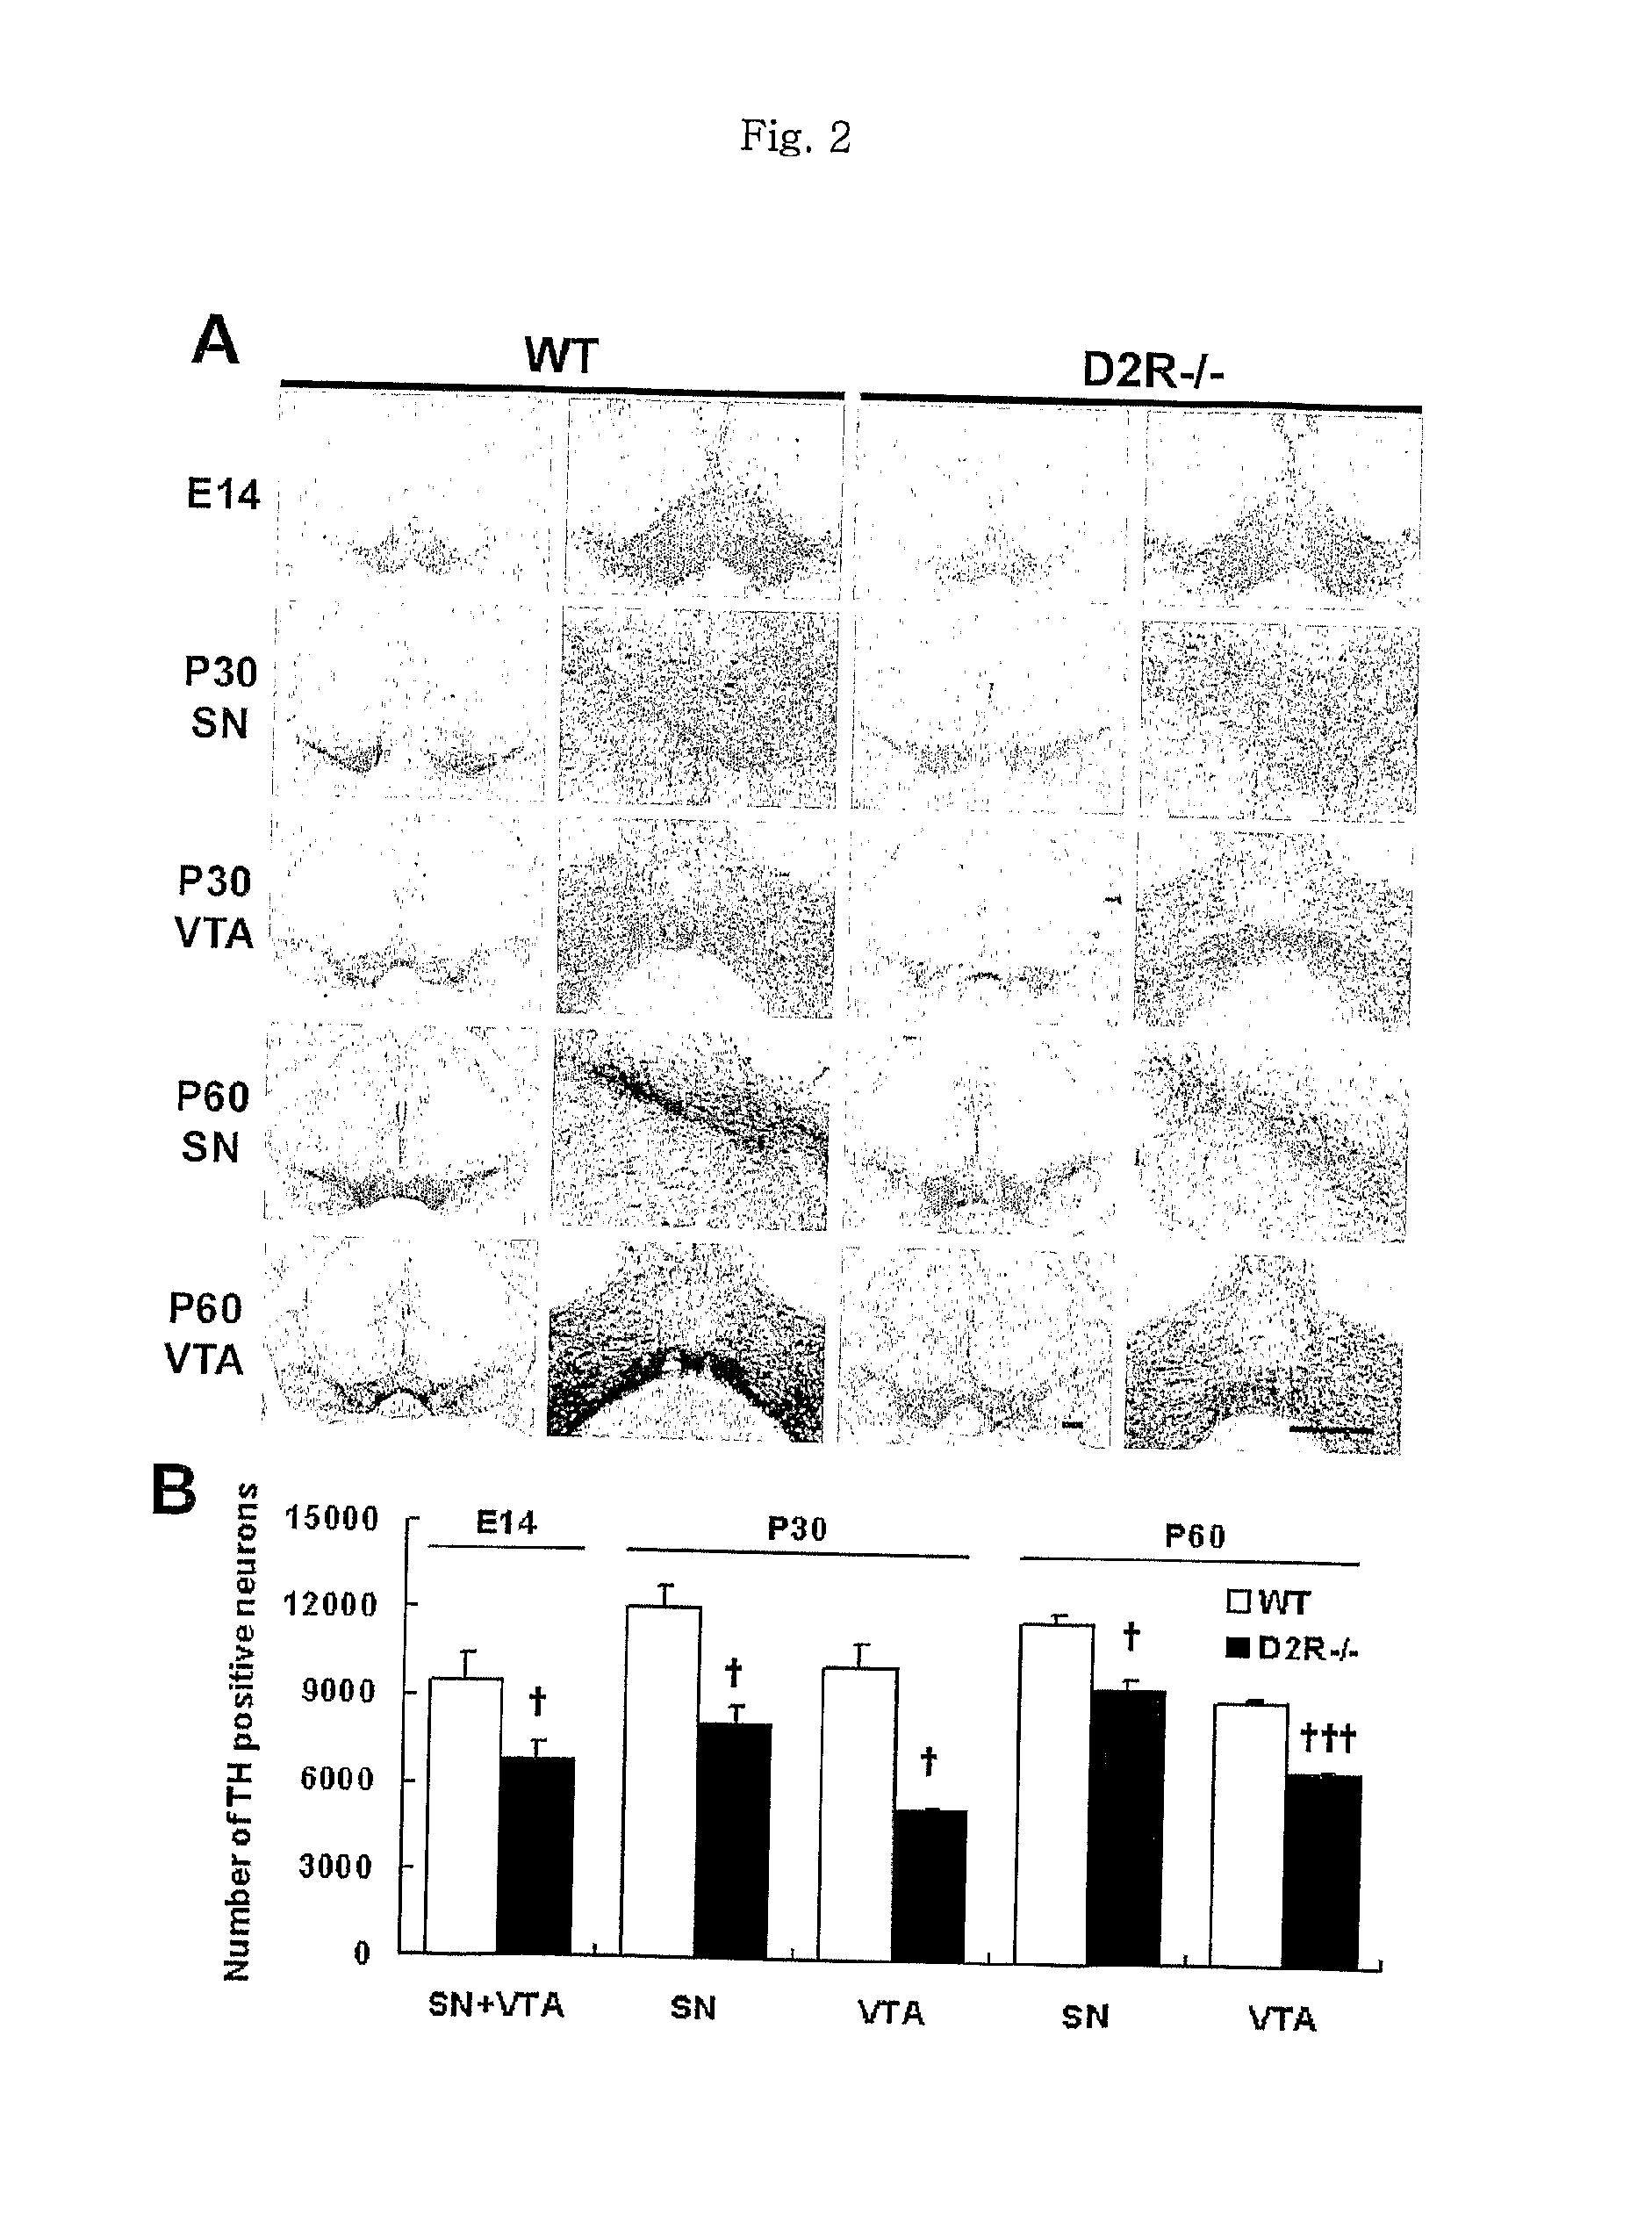 Methods For Modulating The Development Of Dopamine Neuron By The Dopamine D2 Receptor And Compositions Thereof